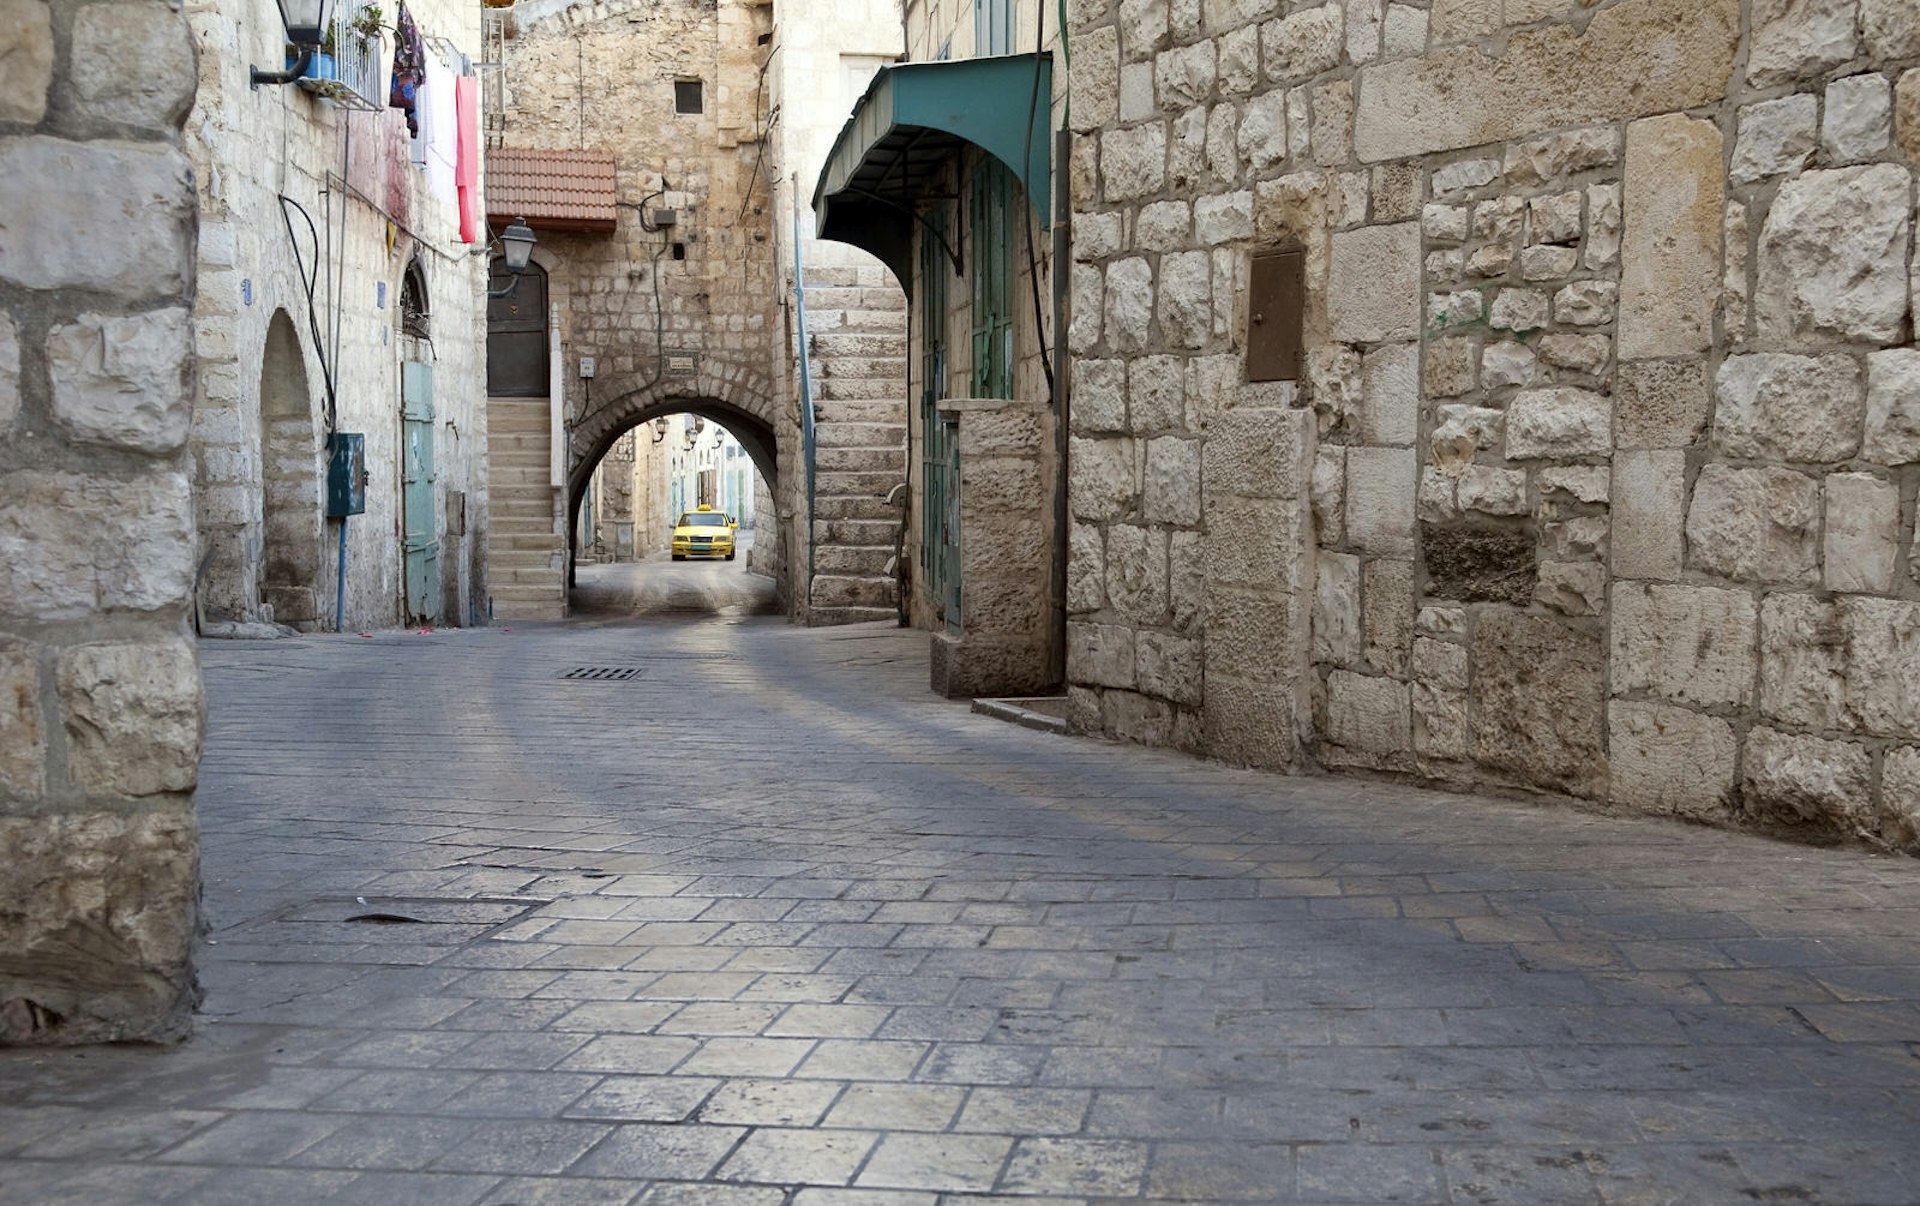 Stone city street and stone buildings on Star Street in the West Bank town of Bethlehem. A Palestinian taxi is in the distance. Image by Joel Carillet / Getty Images